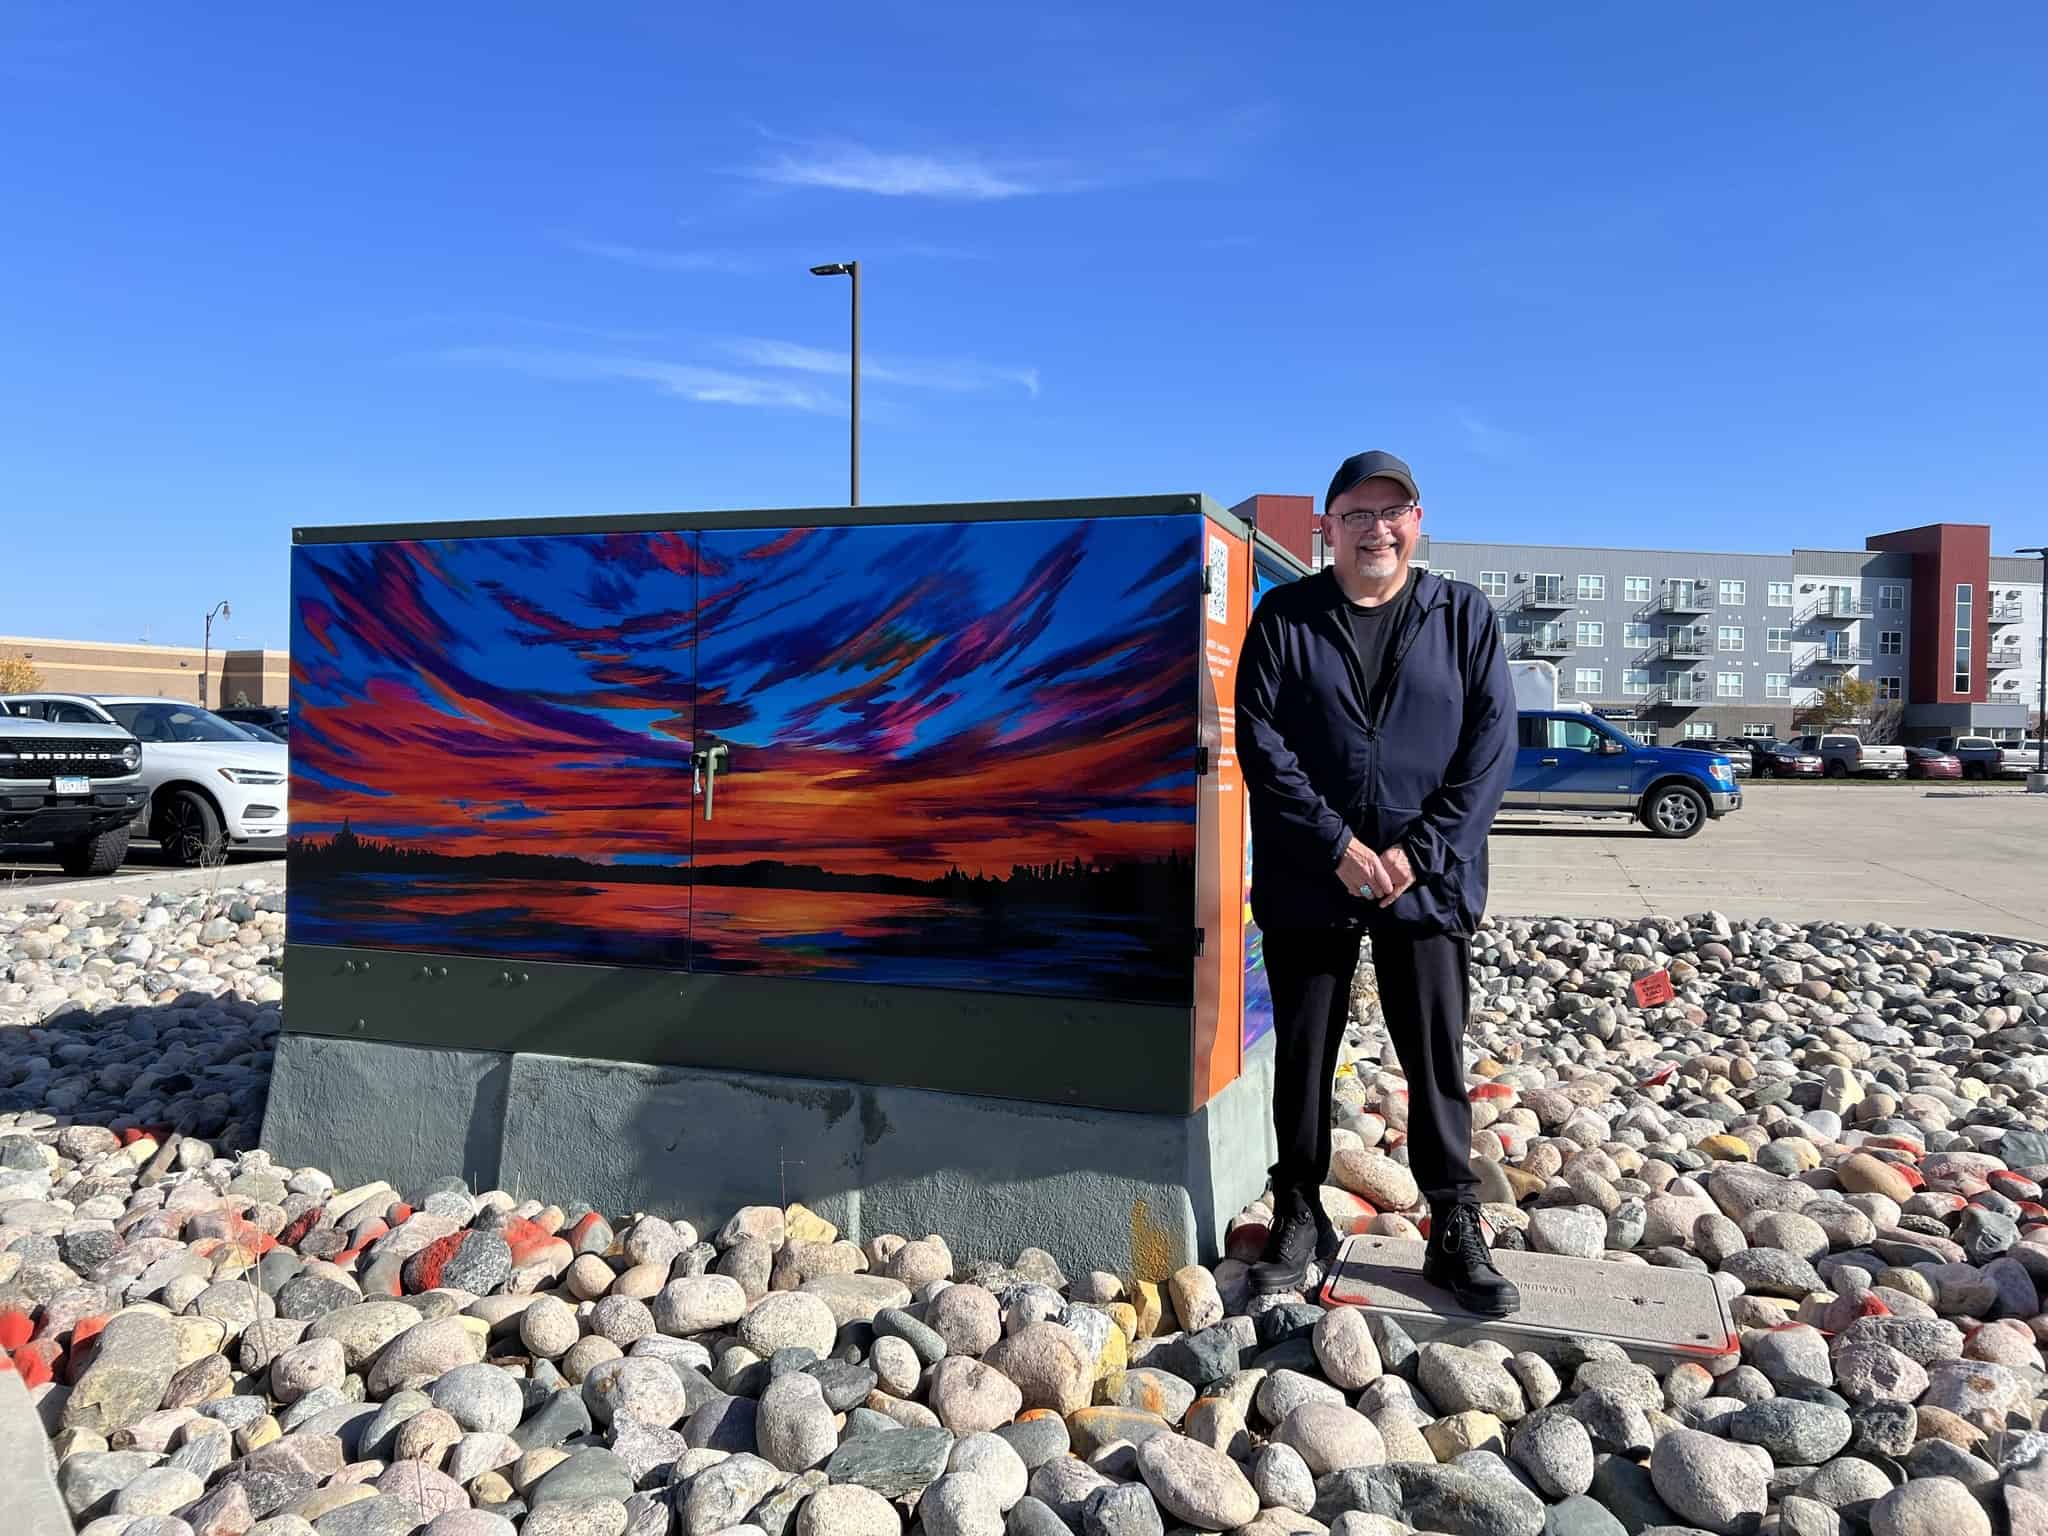 "Summer Sunset No. 1" & "Best of Times" power box art wrap • Kent Estey next to the power box art • Artist: Kent Estey • Power box created in coordination with Arts & Culture Commission and the City of Detroit Lakes Public Utilities